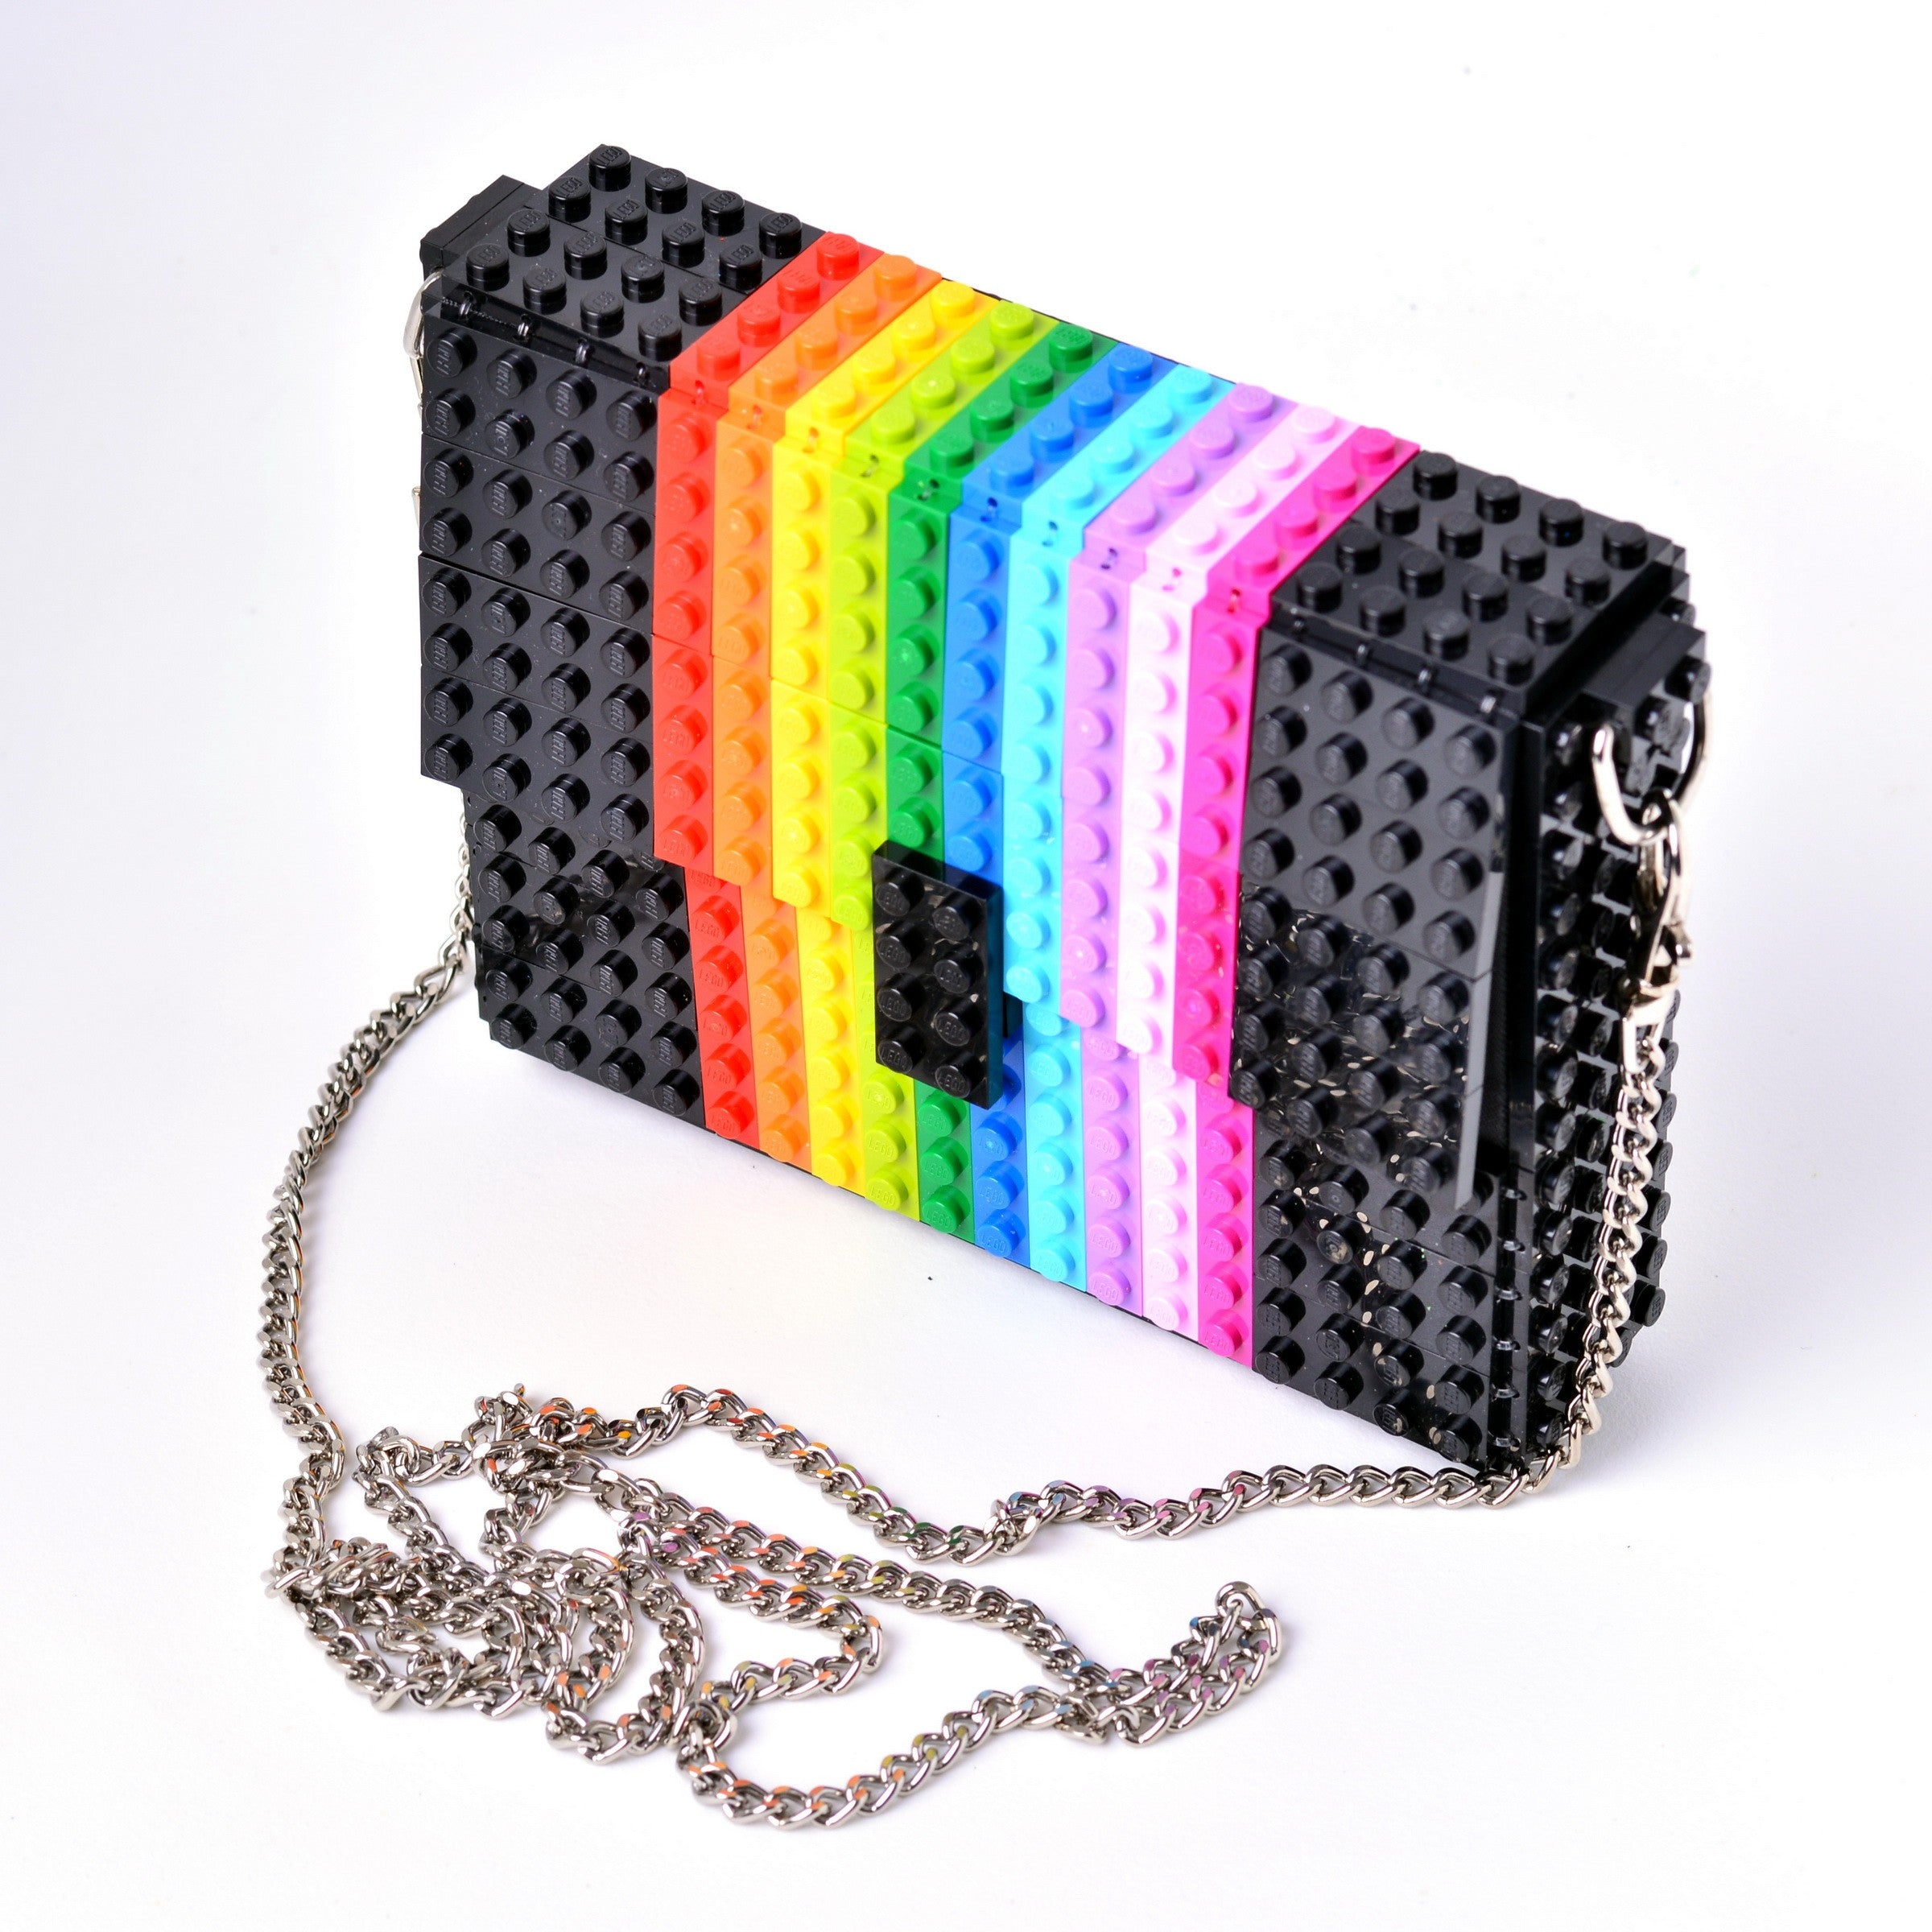 Rainbow Clutch Bags & A Black Outfit